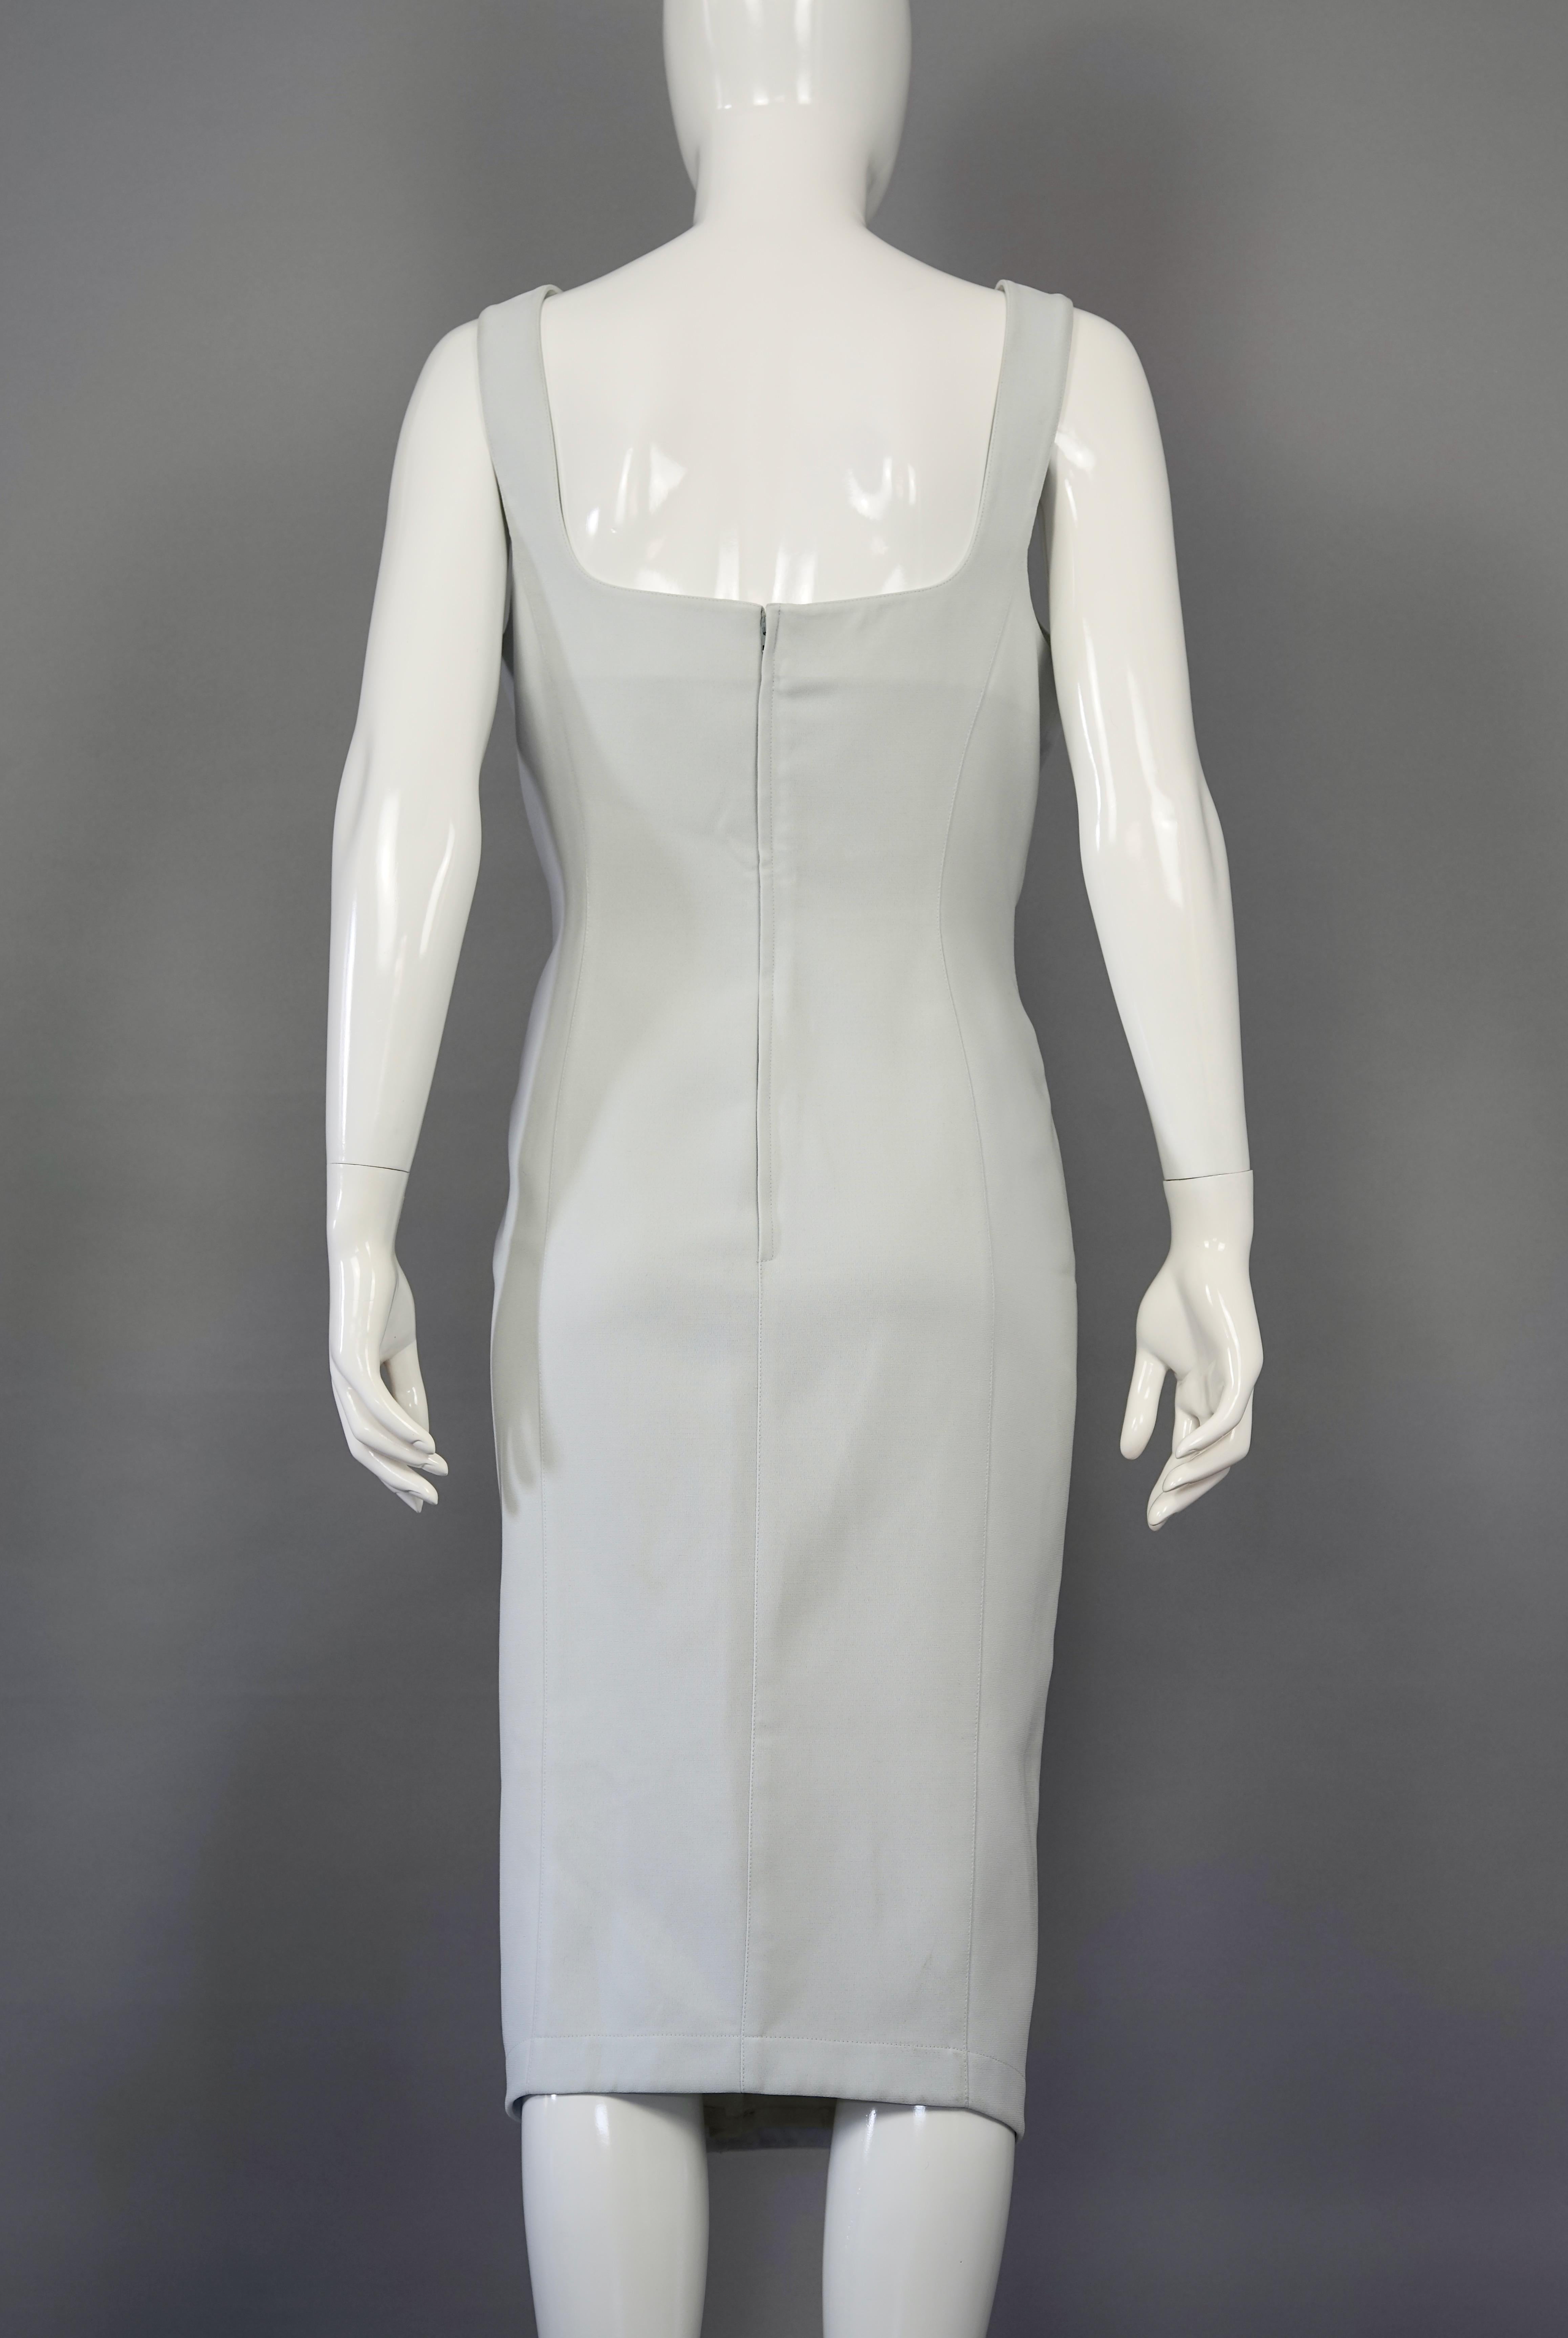 Women's Vintage THIERRY MUGLER Jeweled Cut Out Neckline Dress For Sale